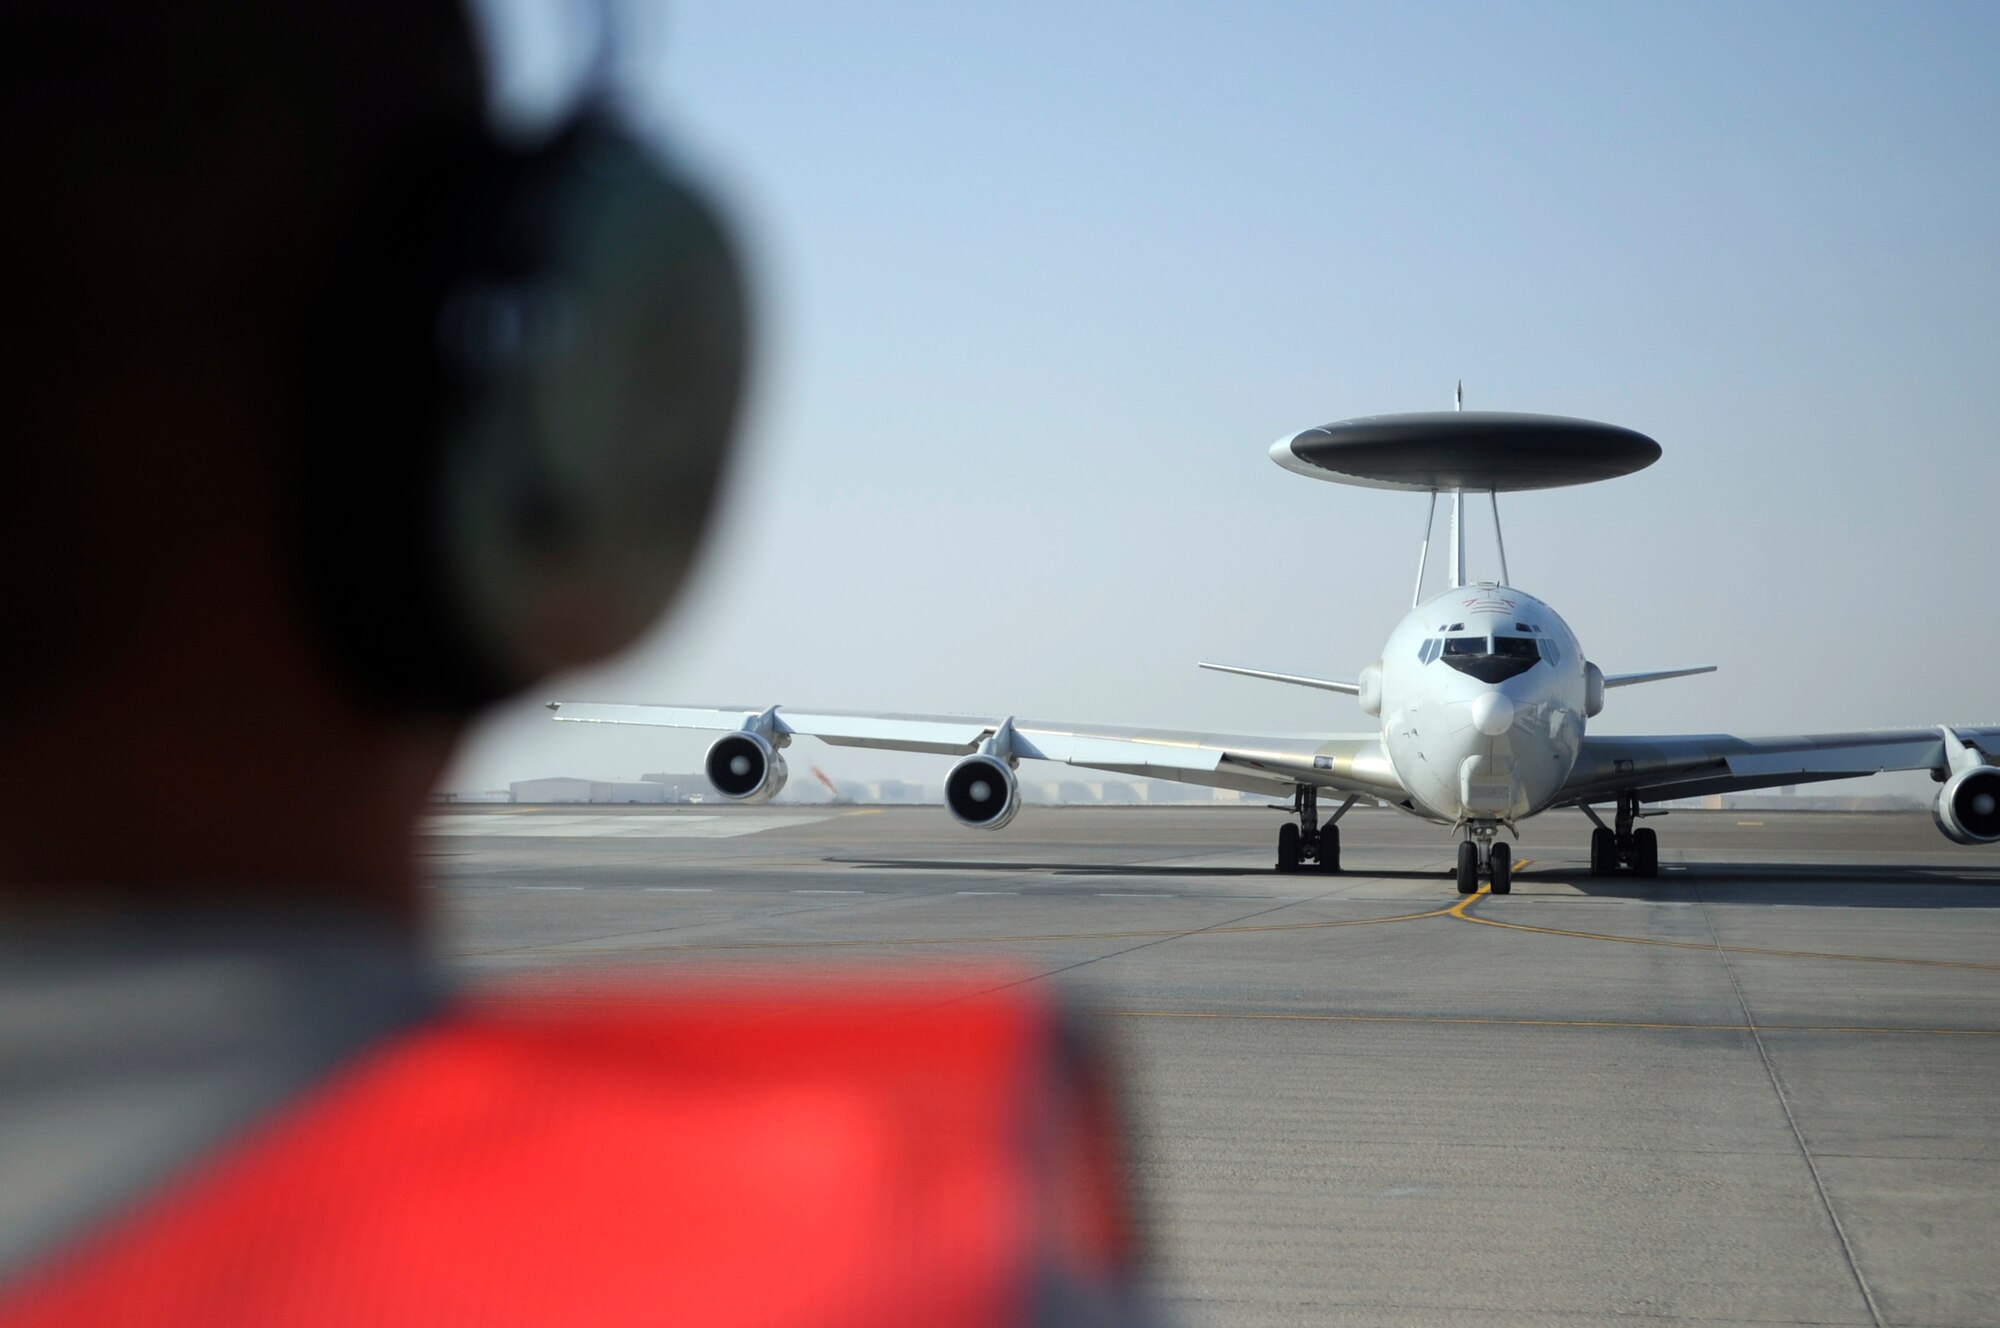 SOUTHWEST ASIA - Staff Sgt. Justin Butler, 380 Expeditionary Aircraft Maintenance Squadron, marshals an E-3 Sentry Nov. 16, 2009. Sergeant Butler is deployed from Tinker Air Force Base, Okla., and hails from Olivehurst, Calif. (U.S. Air Force photo/Senior Airman Stephen Linch)